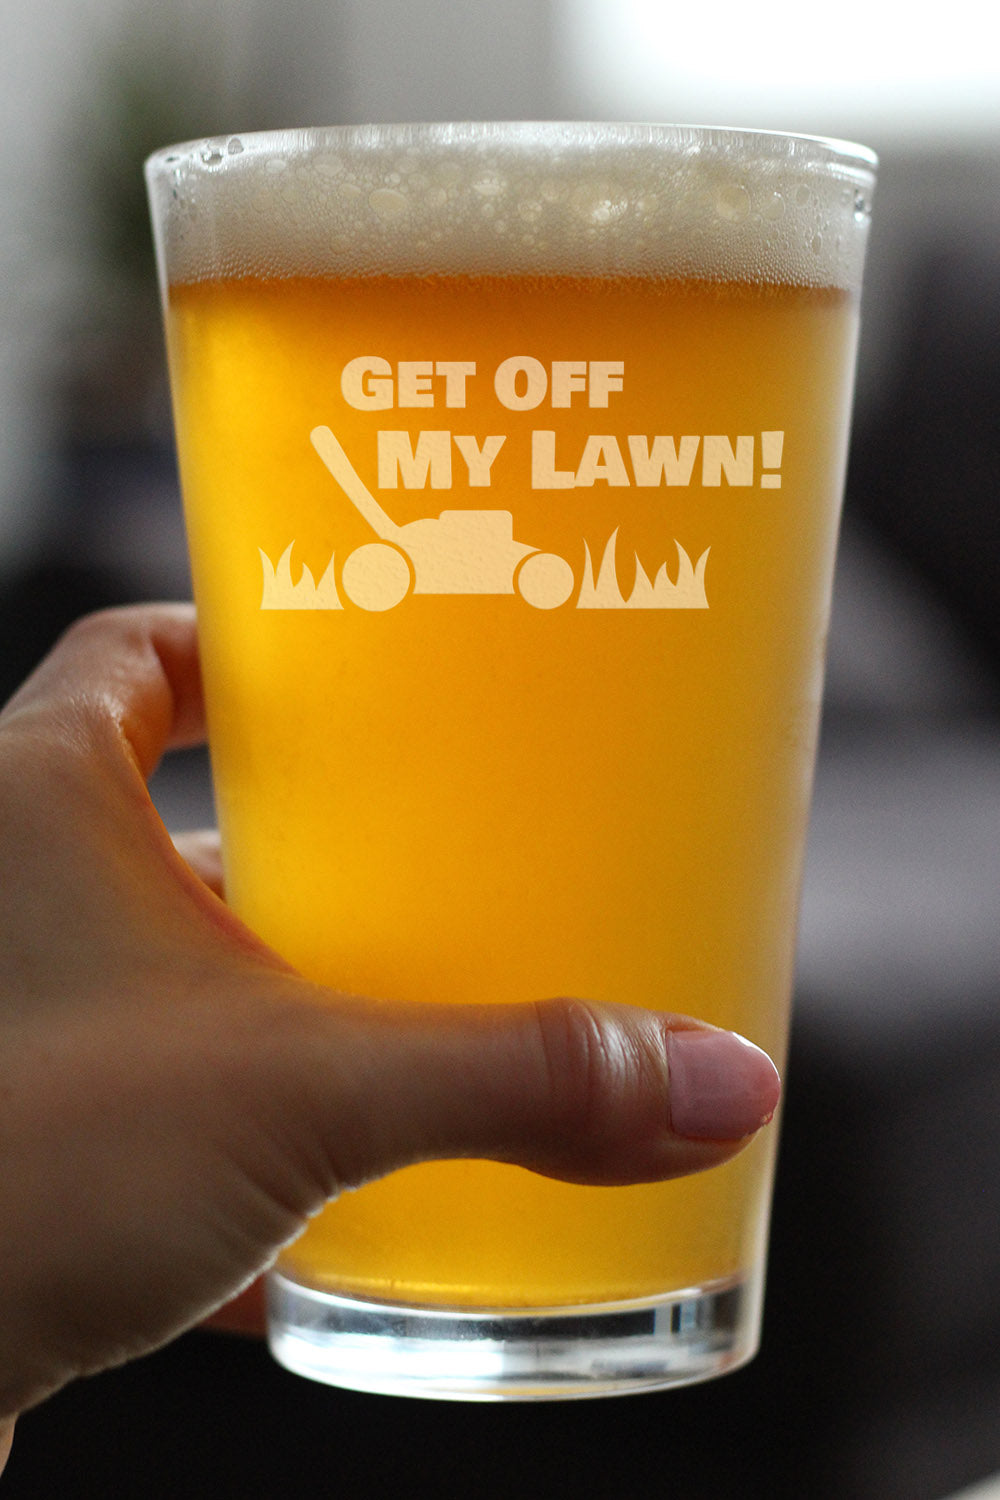 Get Off My Lawn - Funny Pint Glass for Beer - Birthday Gifts for Men or Women Getting Older - Fun Bday Party Décor - 16 oz